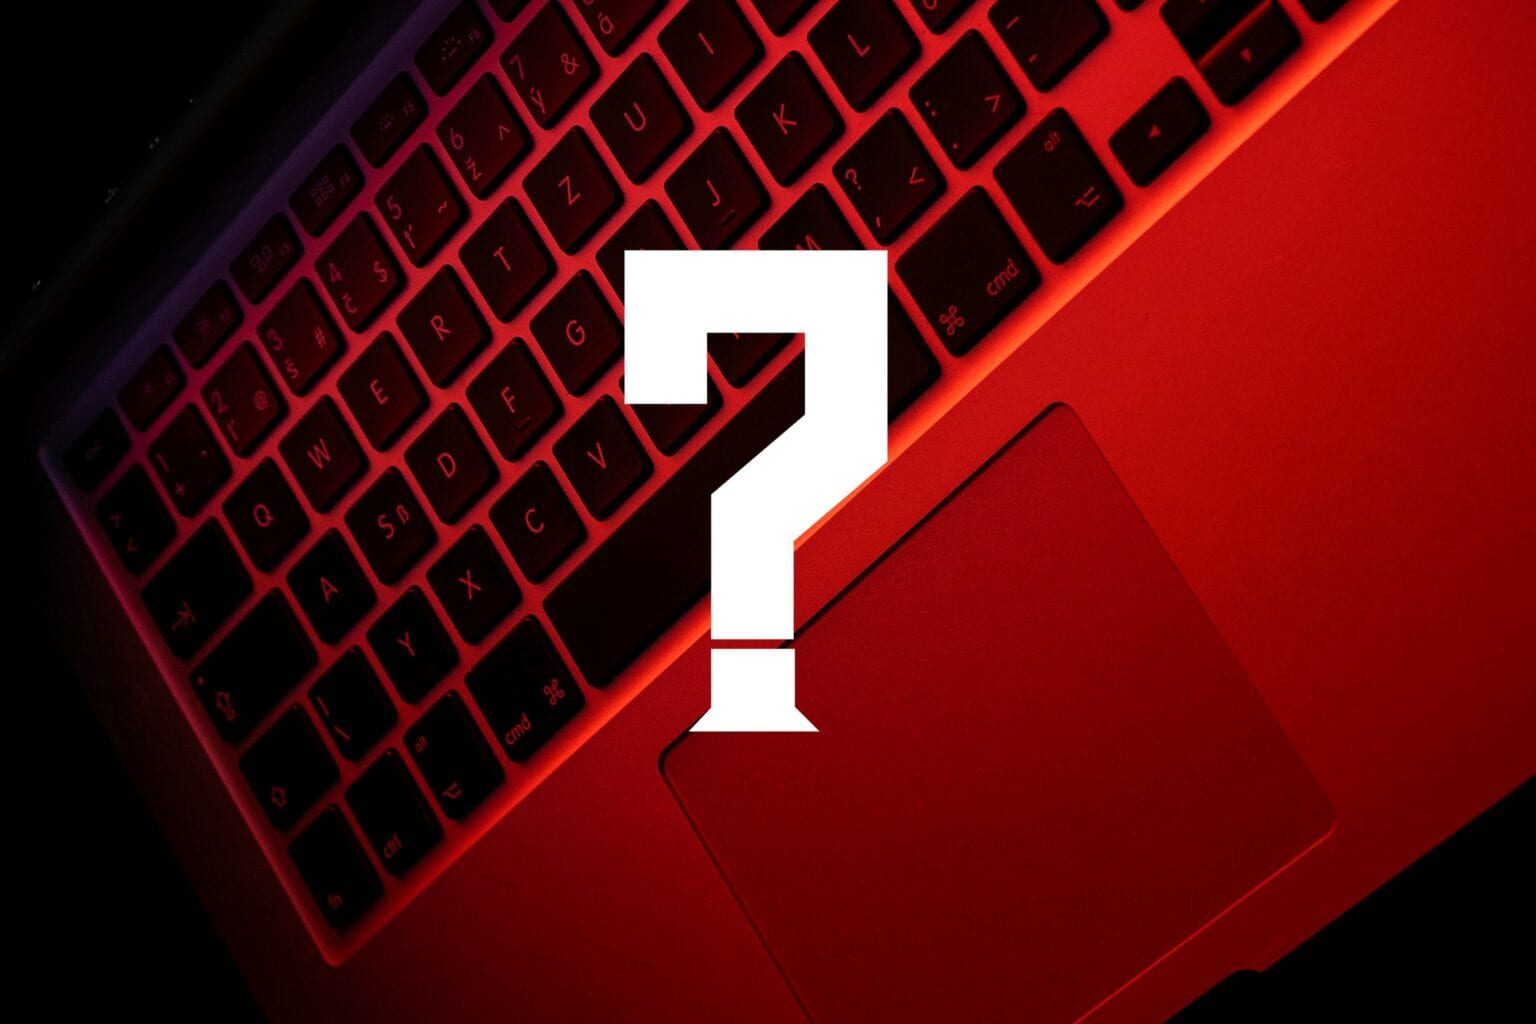 A MacBook Air with ominous red lighting and a giant white question mark.